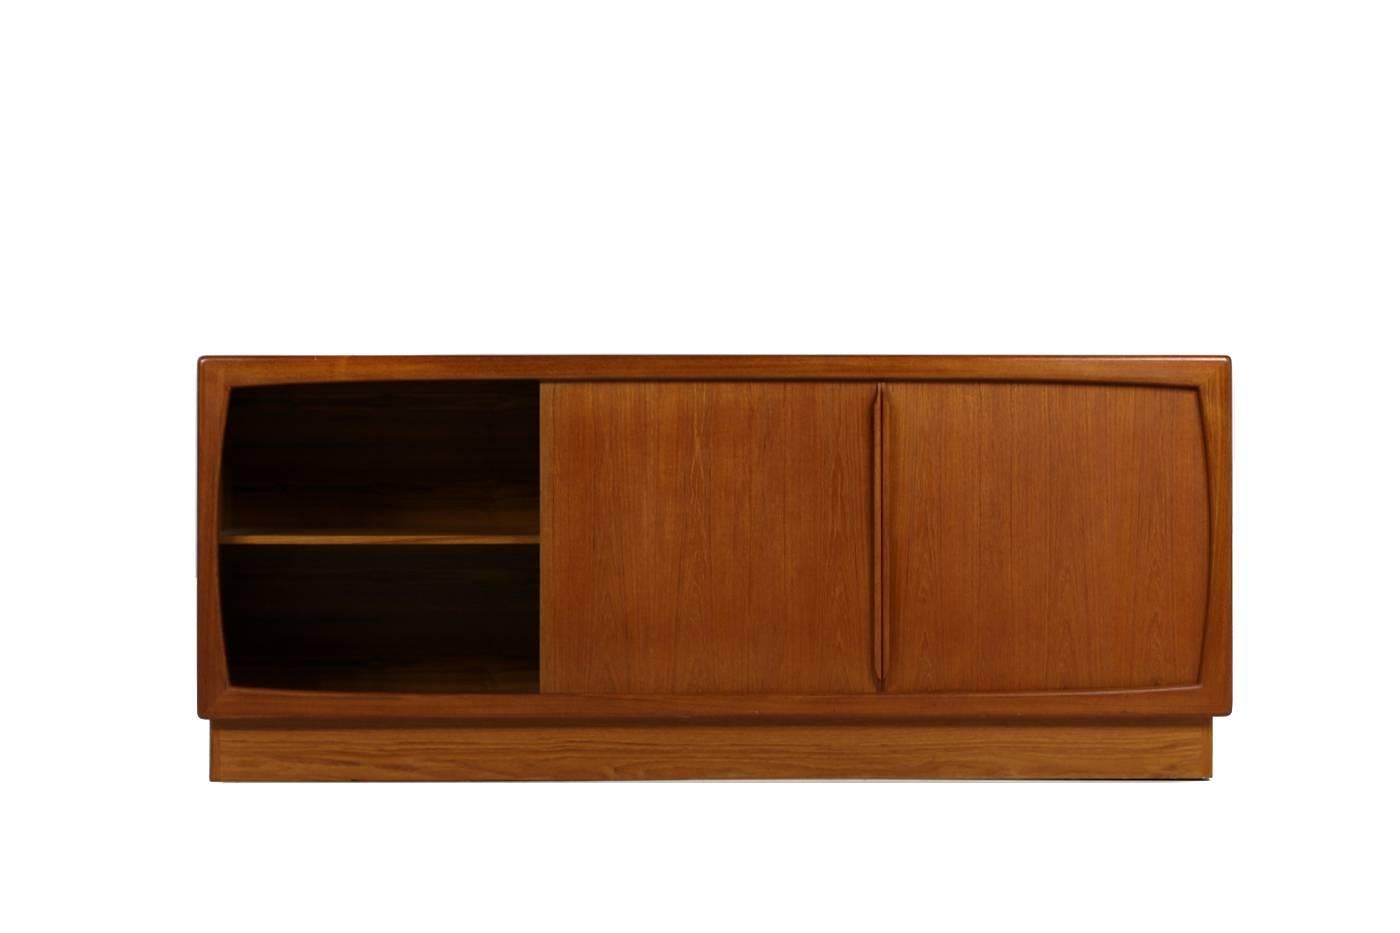 Fantastic 1960s teak sideboard, made in Denmark, with two sliding doors and 6 solid drawers. Overall a good condition, only minor wear consistent with age and use on the top. Good ans solid quality, beautiful teak colors, nice patina.
  